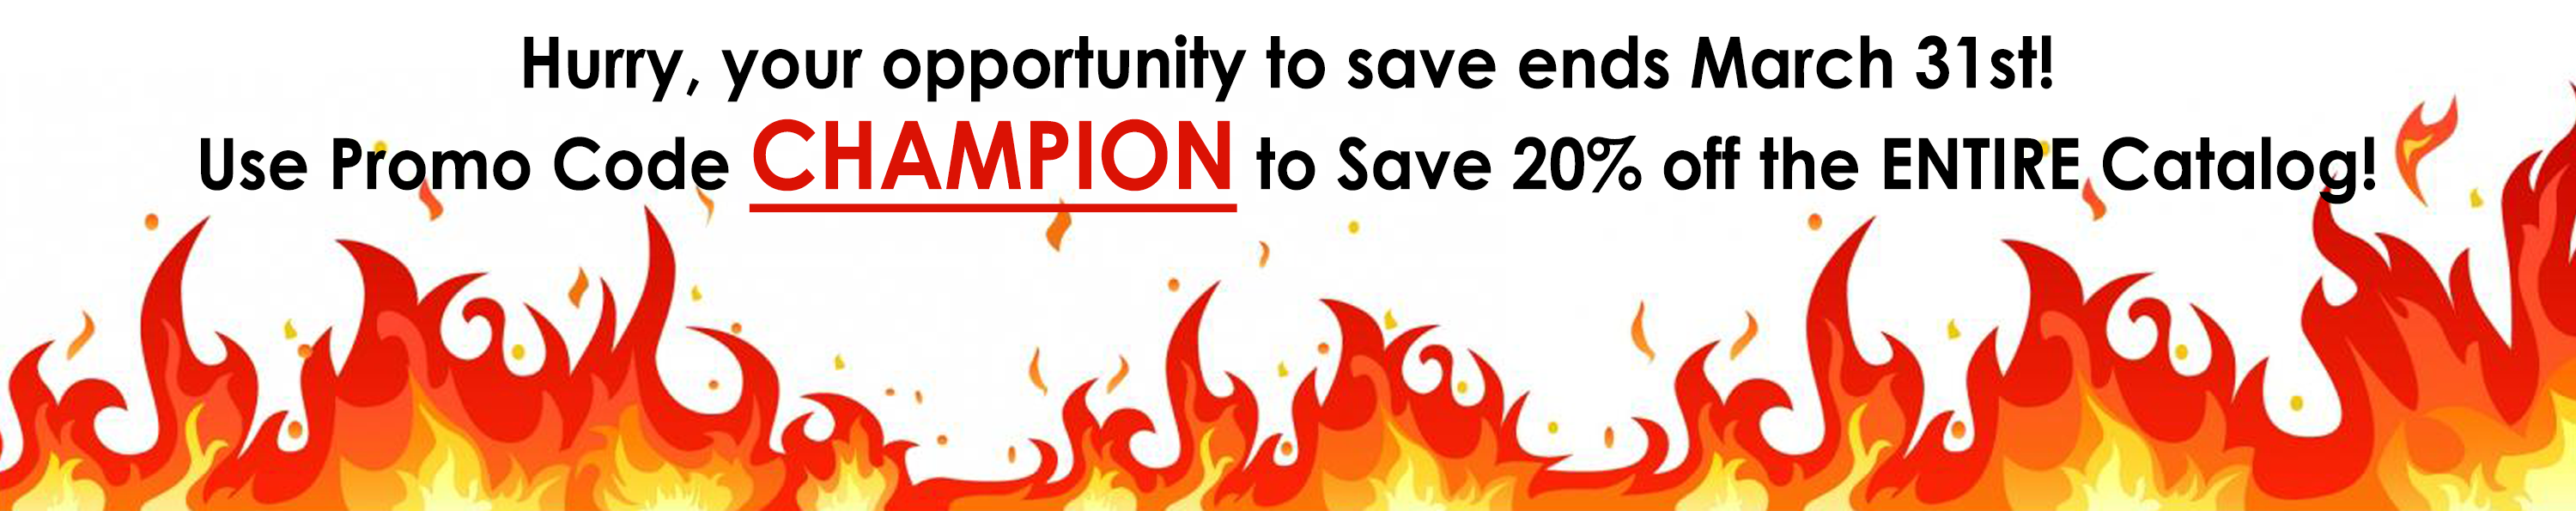 Hurry to Save